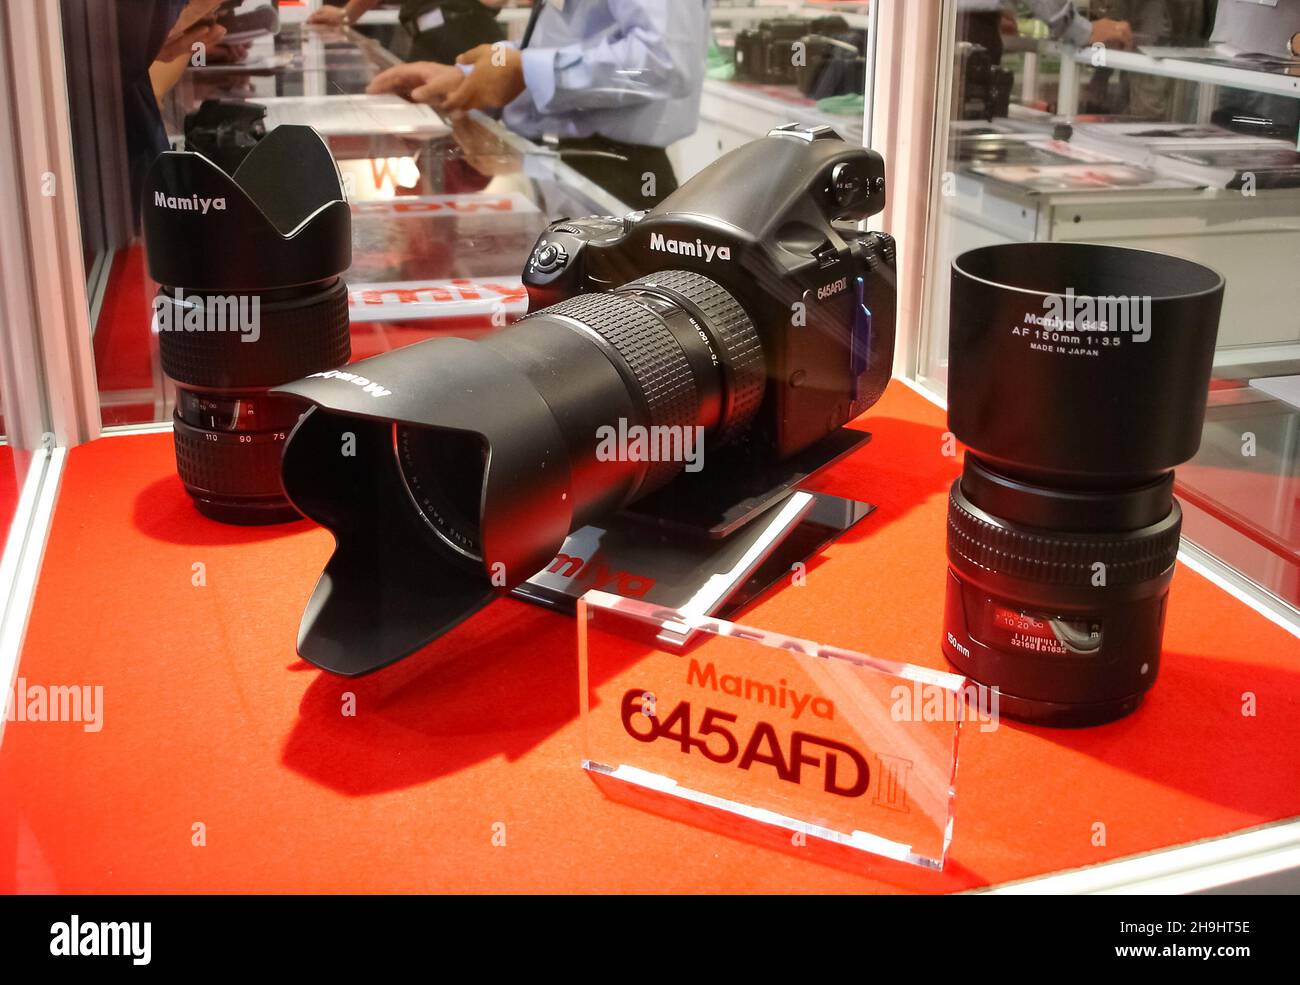 Cologne, Germany, 28 September 2006. Mamiya 645 AFD II digital medium format camera and lenses on display at the Photokina trade fair for the photographic and imaging industry Stock Photo